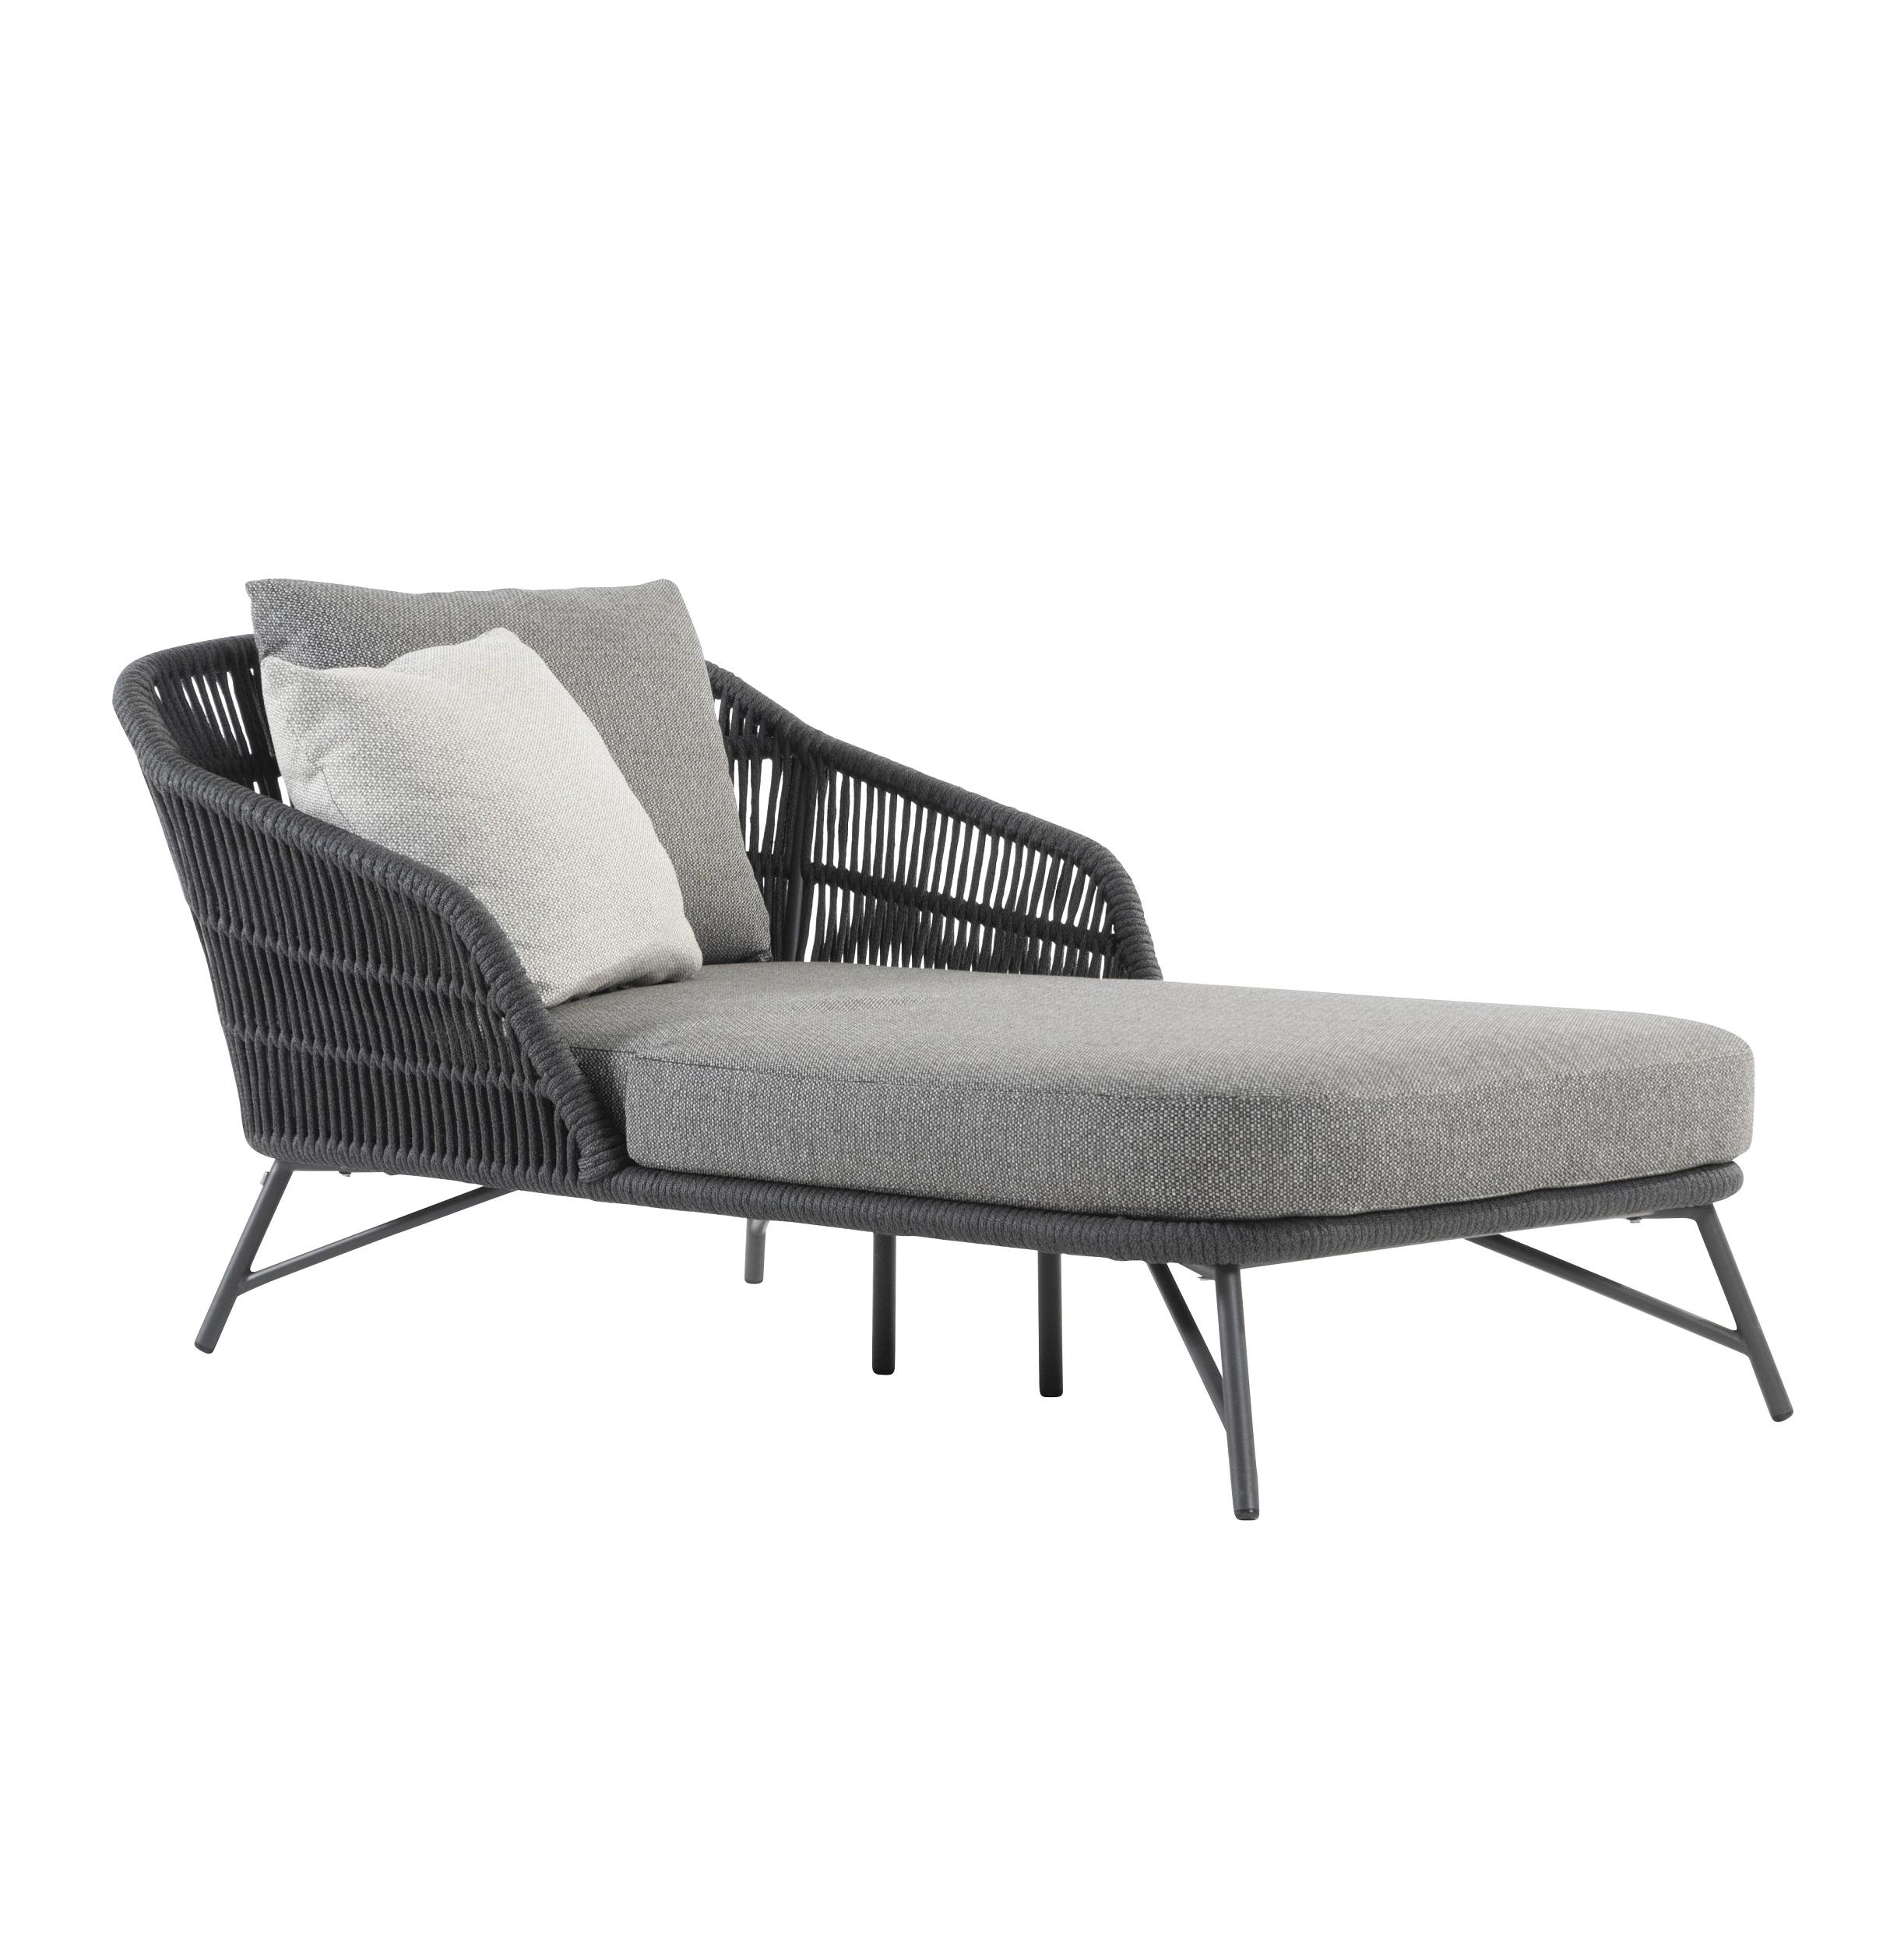 cut out single lounger or daybed in rope weave